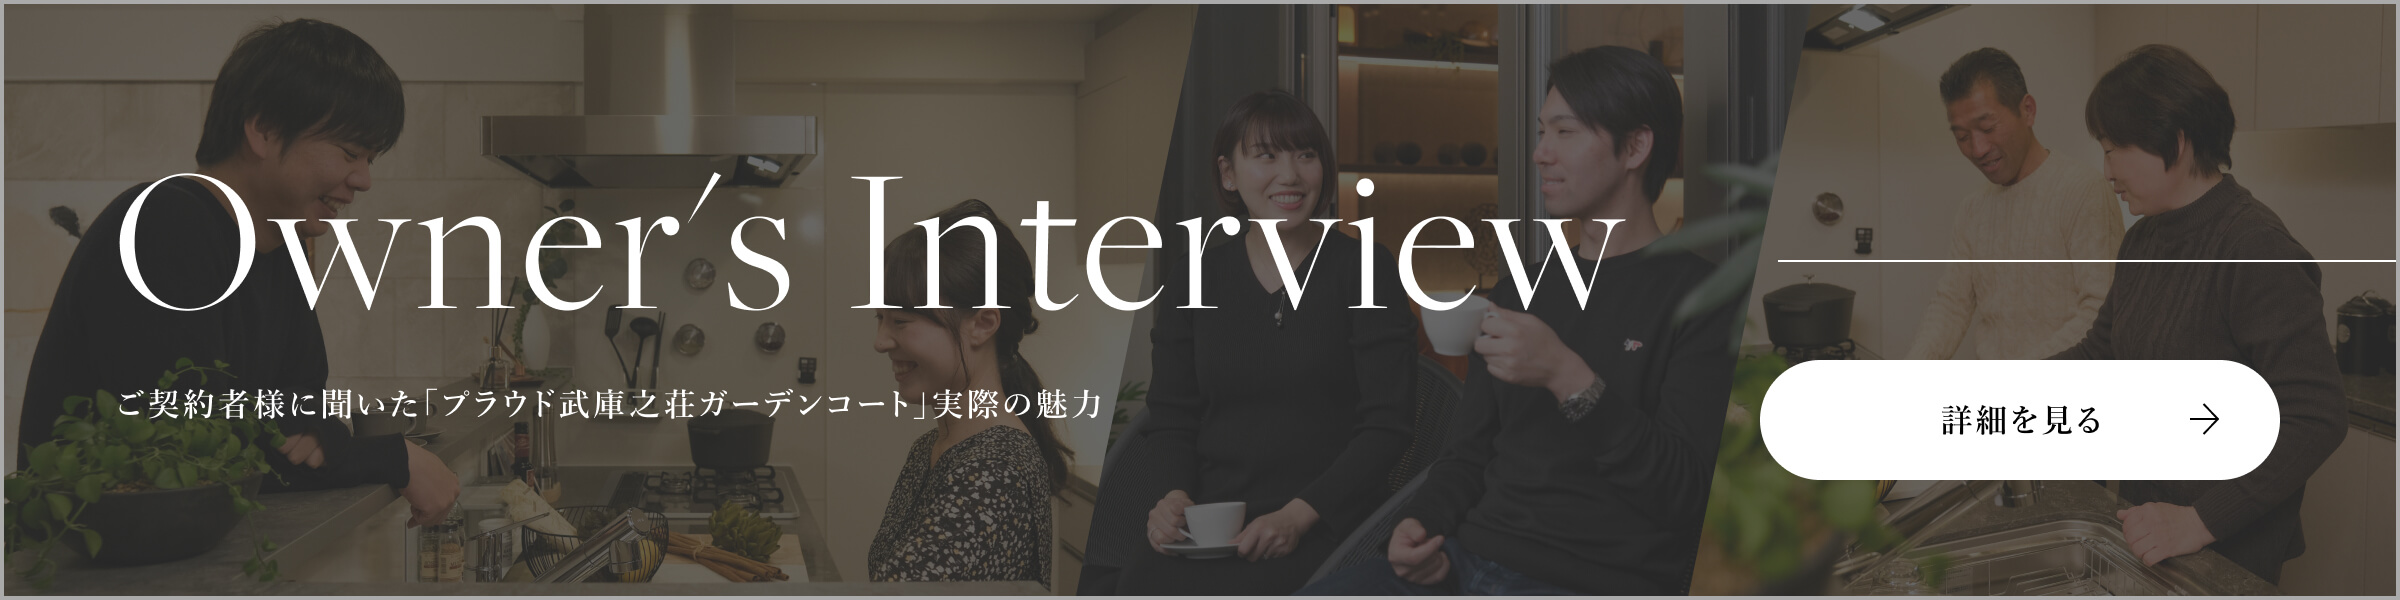 Owner's interview 詳細を見る